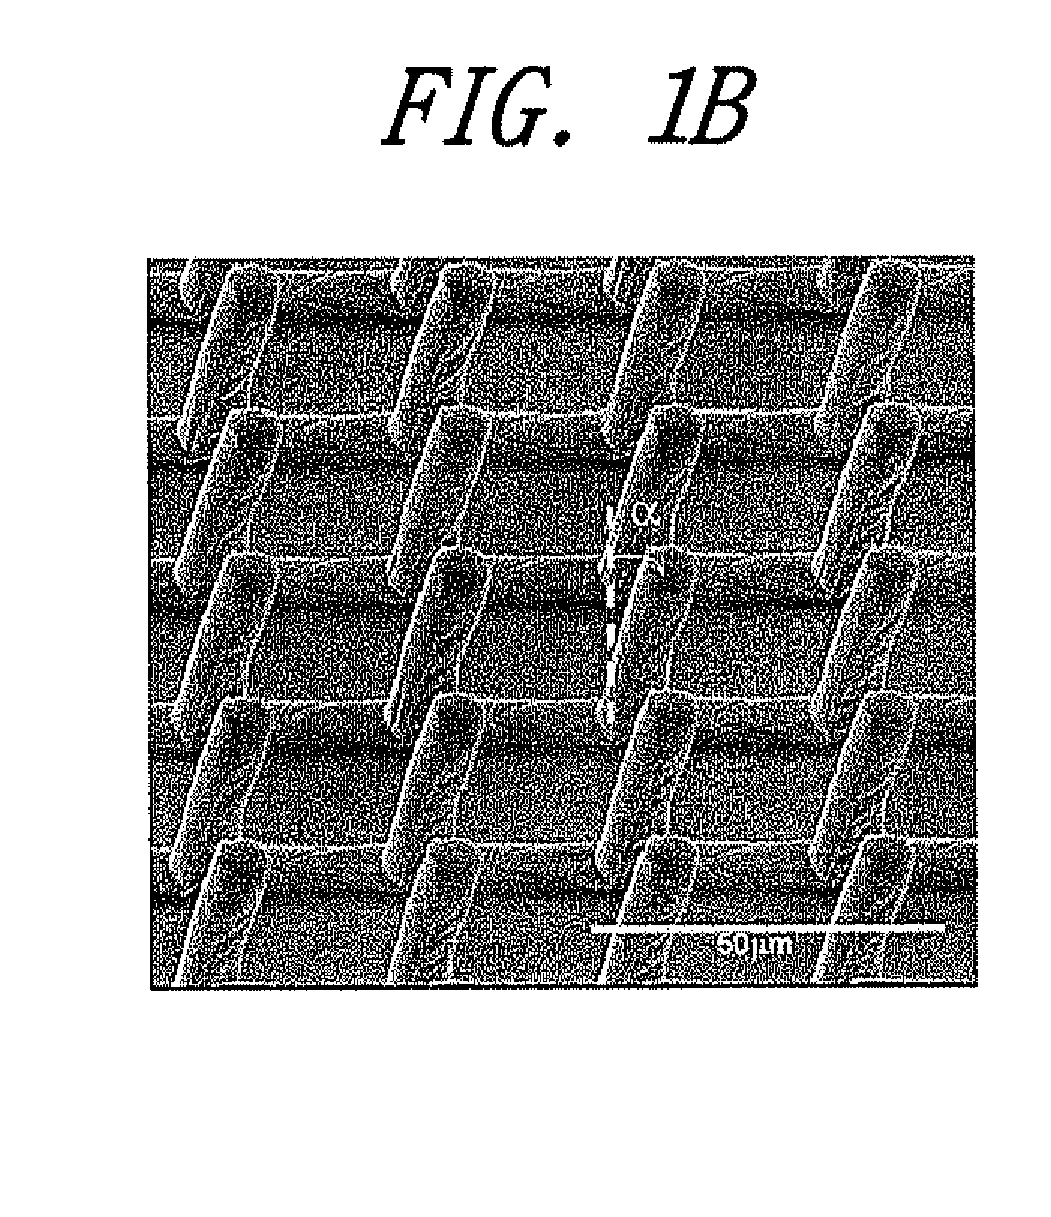 Polymer microstructure with tilted micropillar array and method of fabricating the same